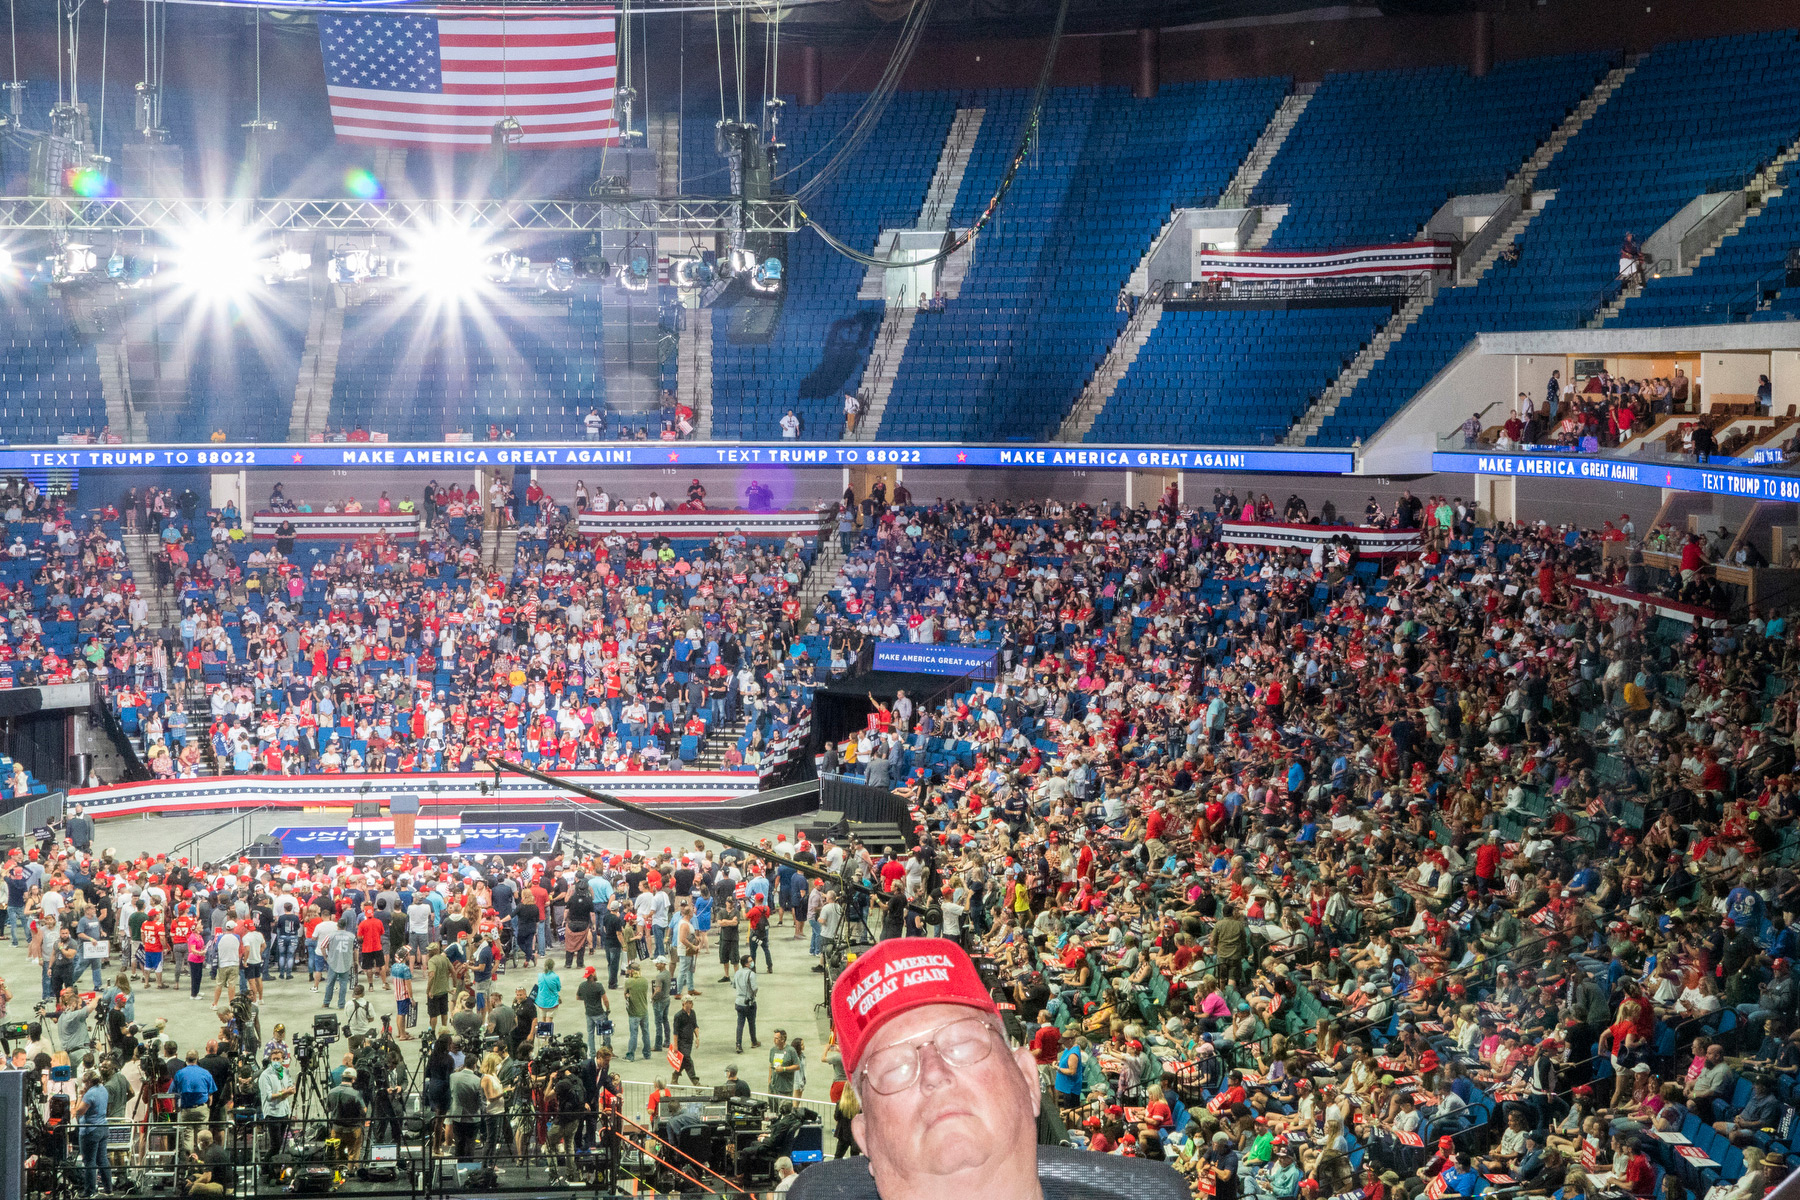 Trump rally attendees wait for the President to arrive at the BOK Center in Tulsa, Okla., on June 20 (Peter van Agtmael—Magnum Photos for TIME)